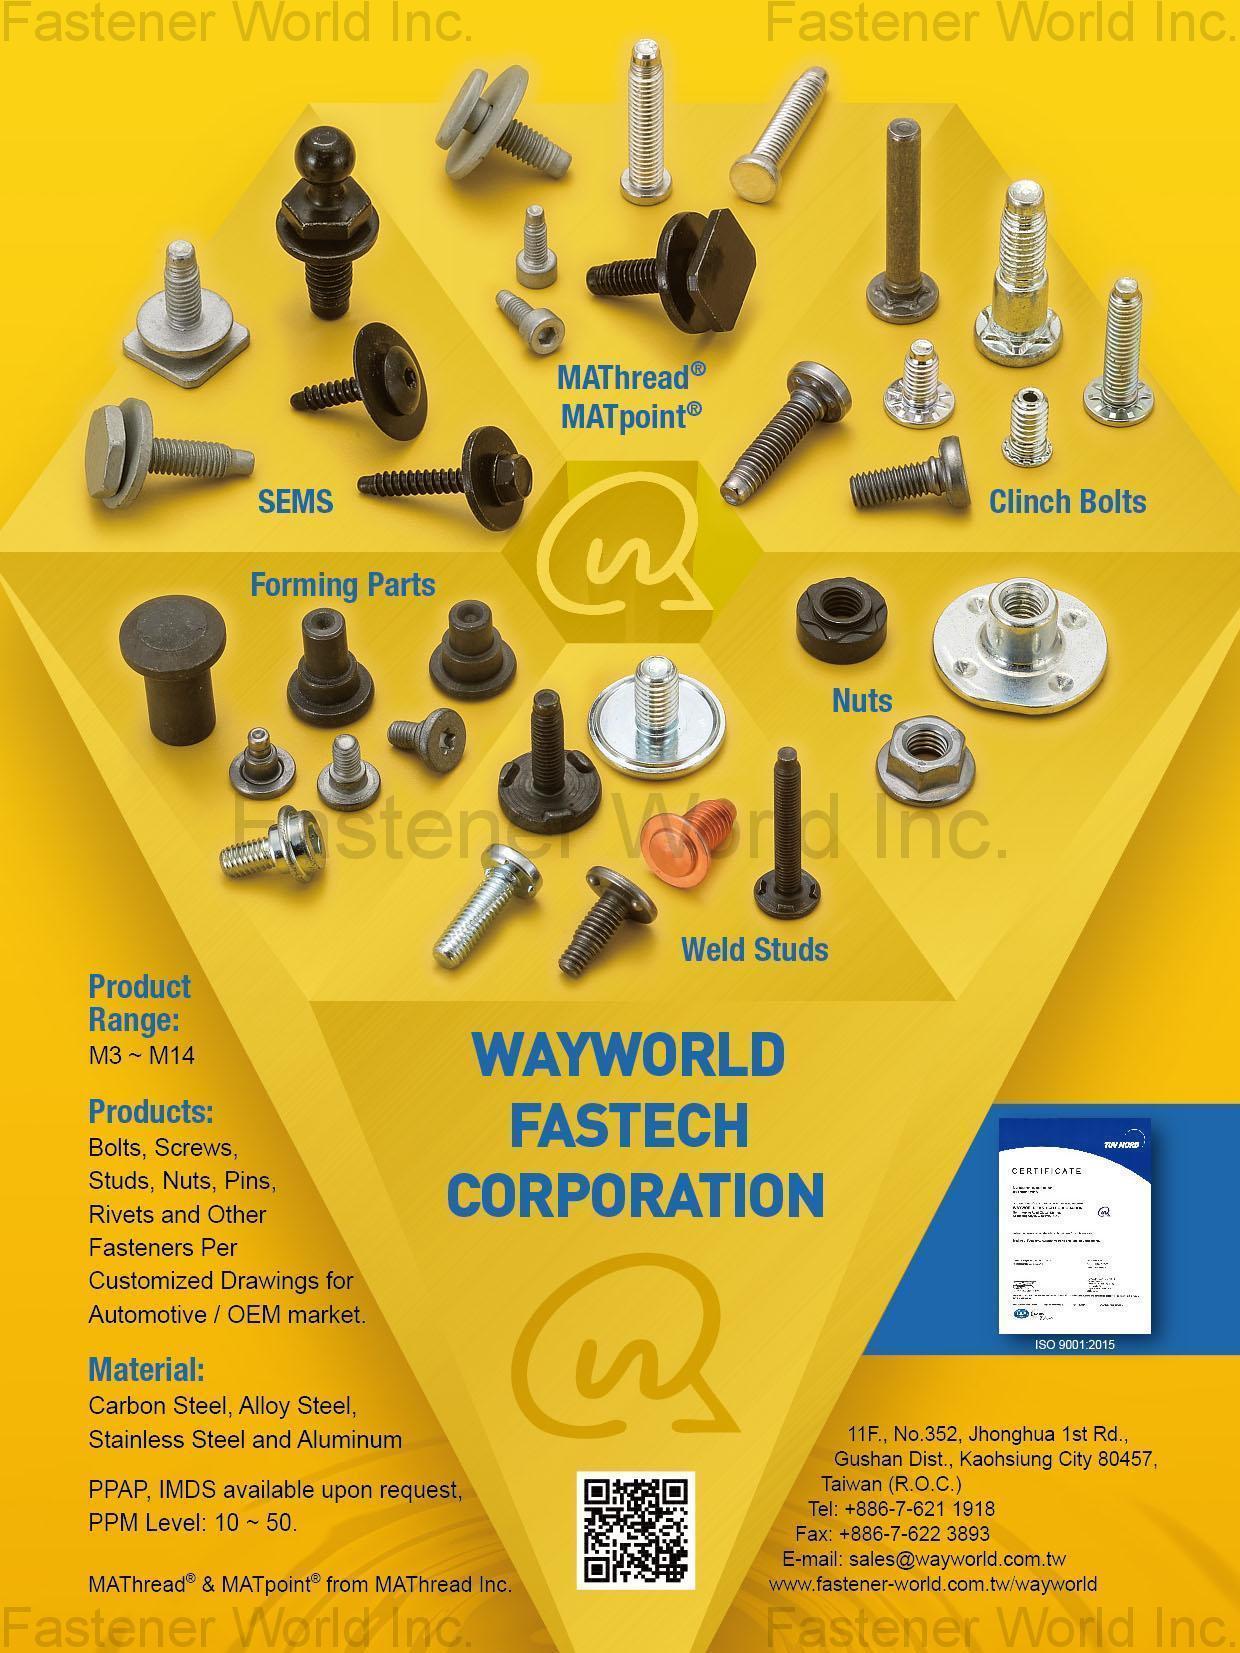 WAYWORLD FASTECH CORPORATION , Sems,Forming Parts,Weld Studs,Nuts,Clinch Bolts, MAThread®, MATpoint® , Automotive & Motorcycle Special Screws / Bolts